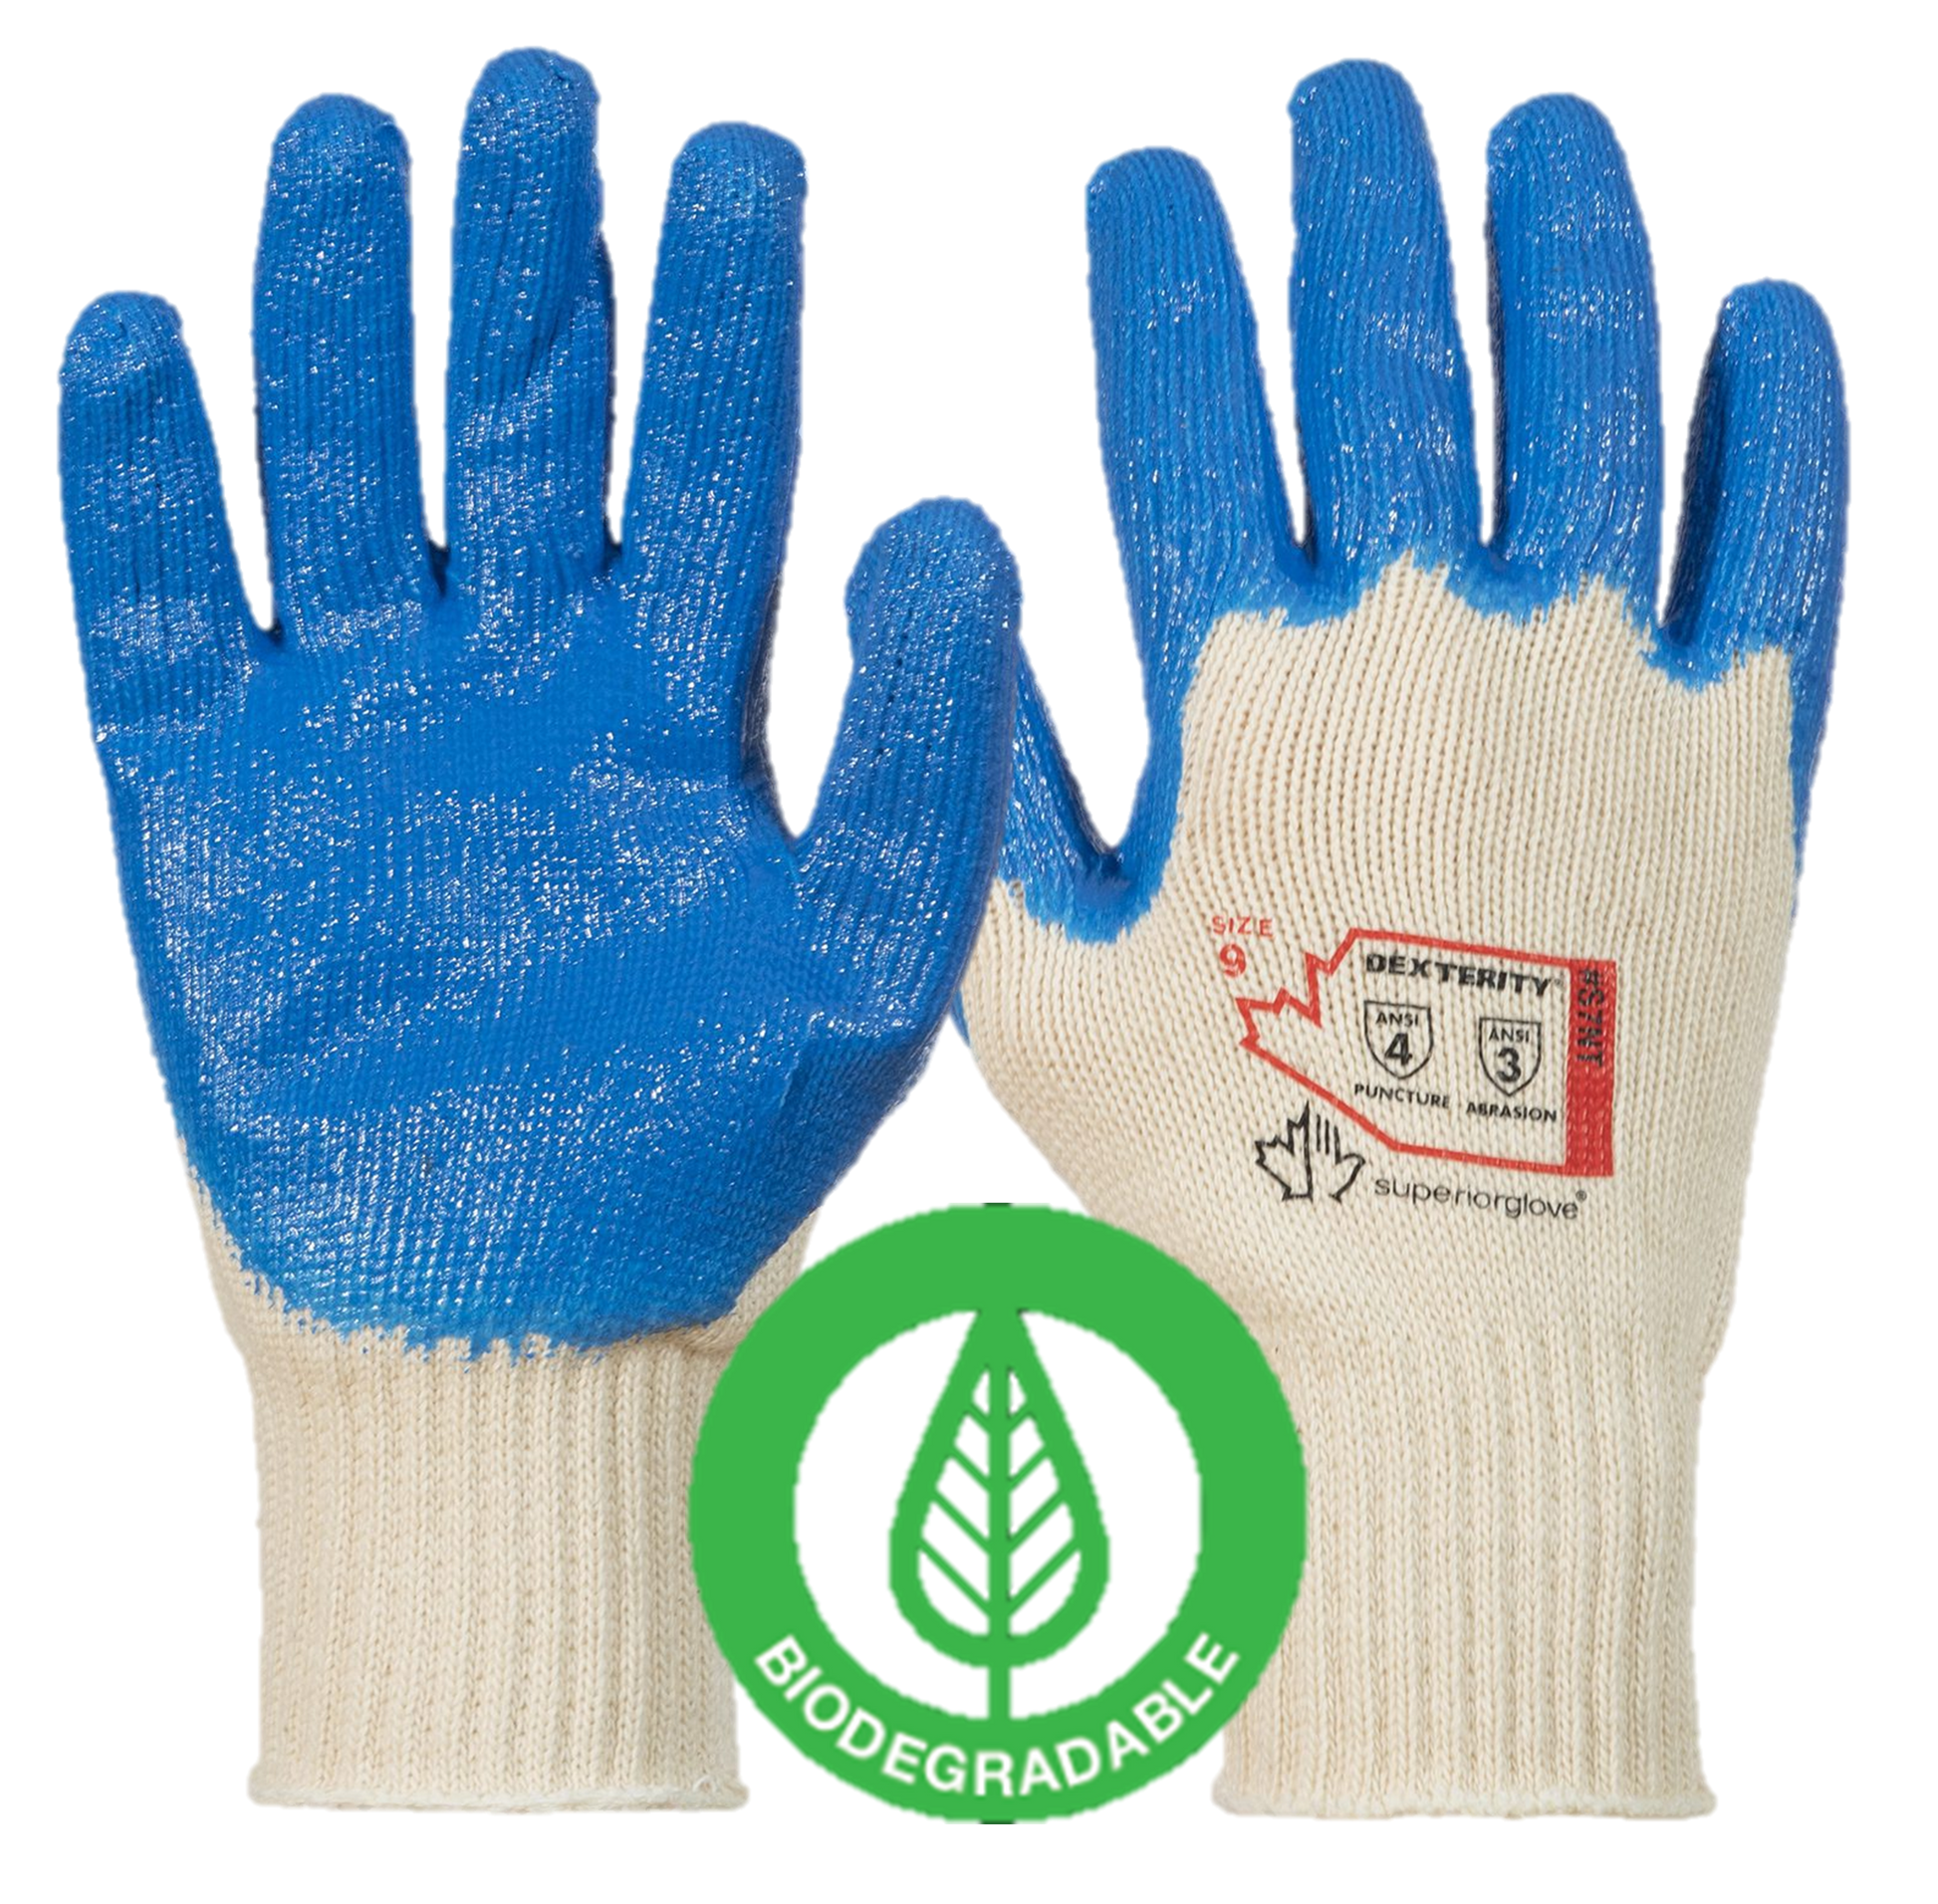 Superior Glove® Dexterity® 7-gauge 100% cotton seamless knit with blue nitrile coated palms provides great comfort and performance in a medium-duty, general-purpose glove which is 100% biodegradable.